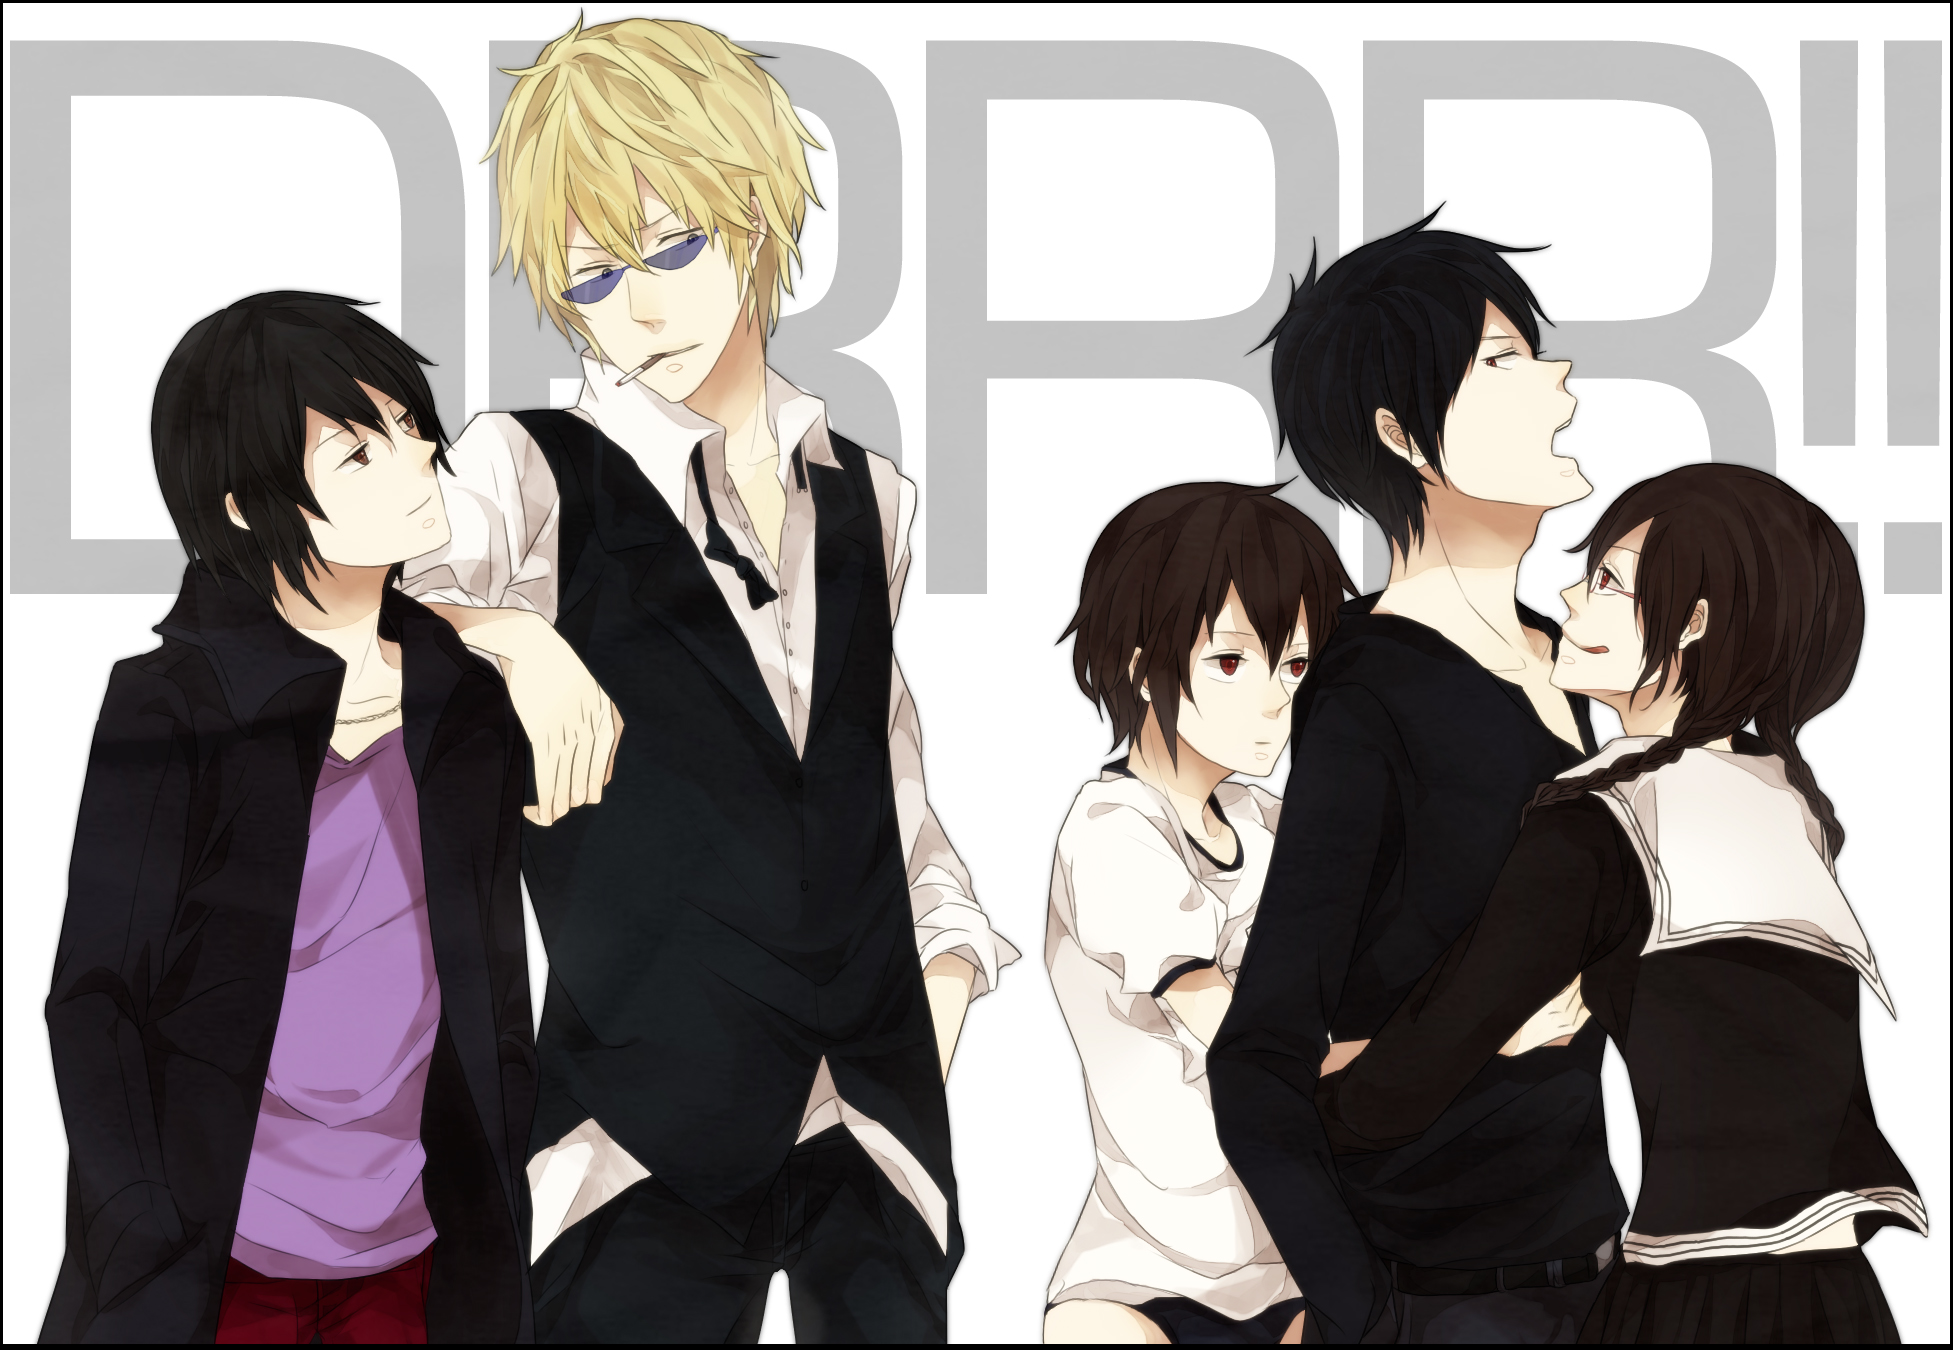 A creative anime wallpaper featuring characters from Durarara!